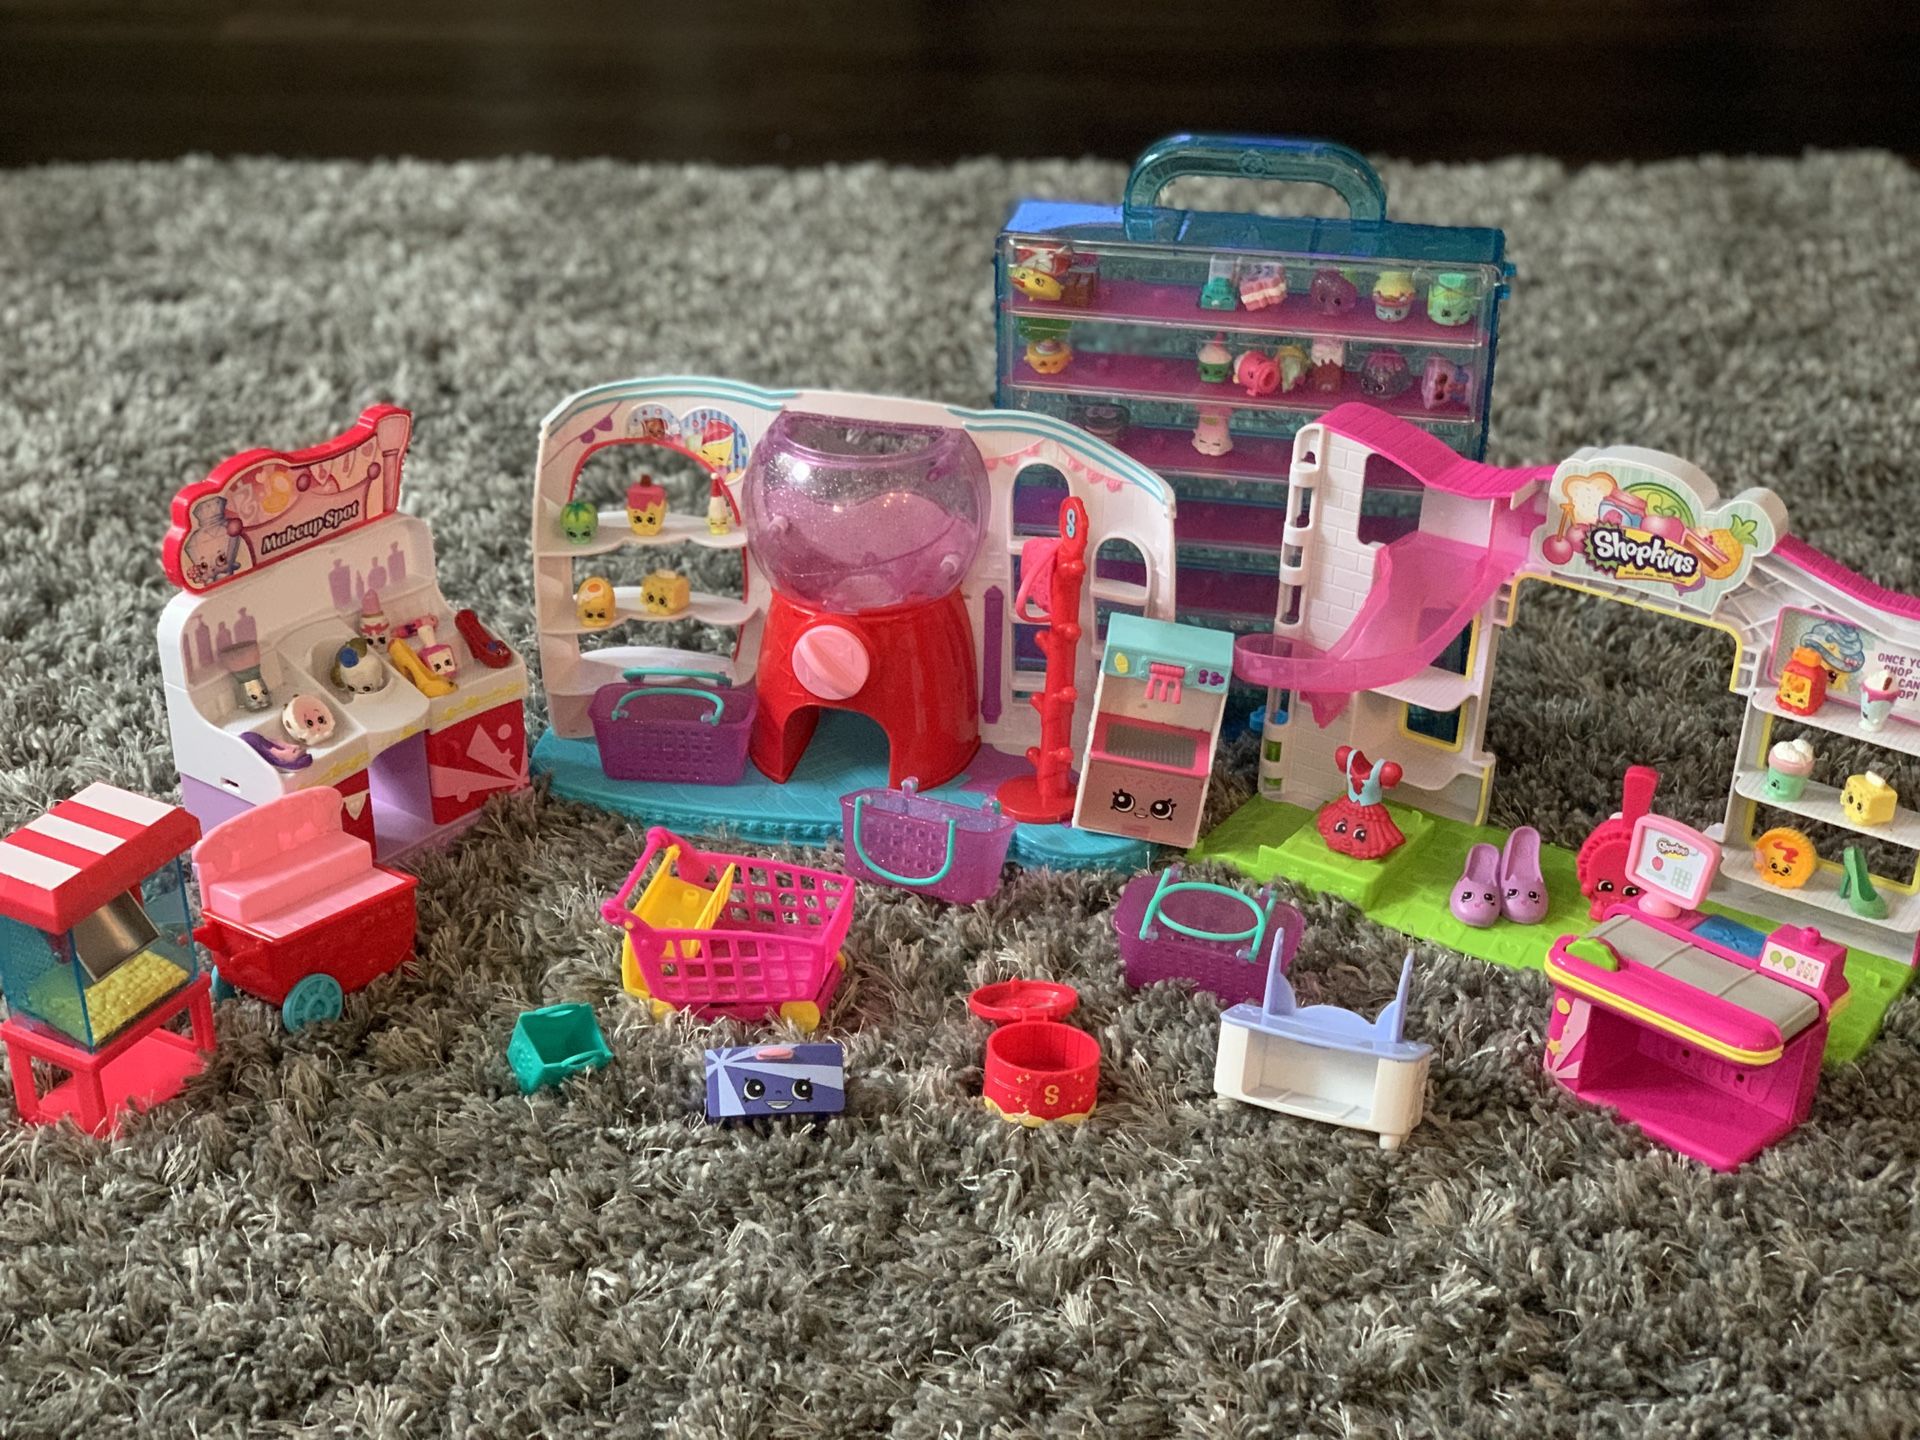 Shopkins playsets with 37 shopkins and 58 pieces